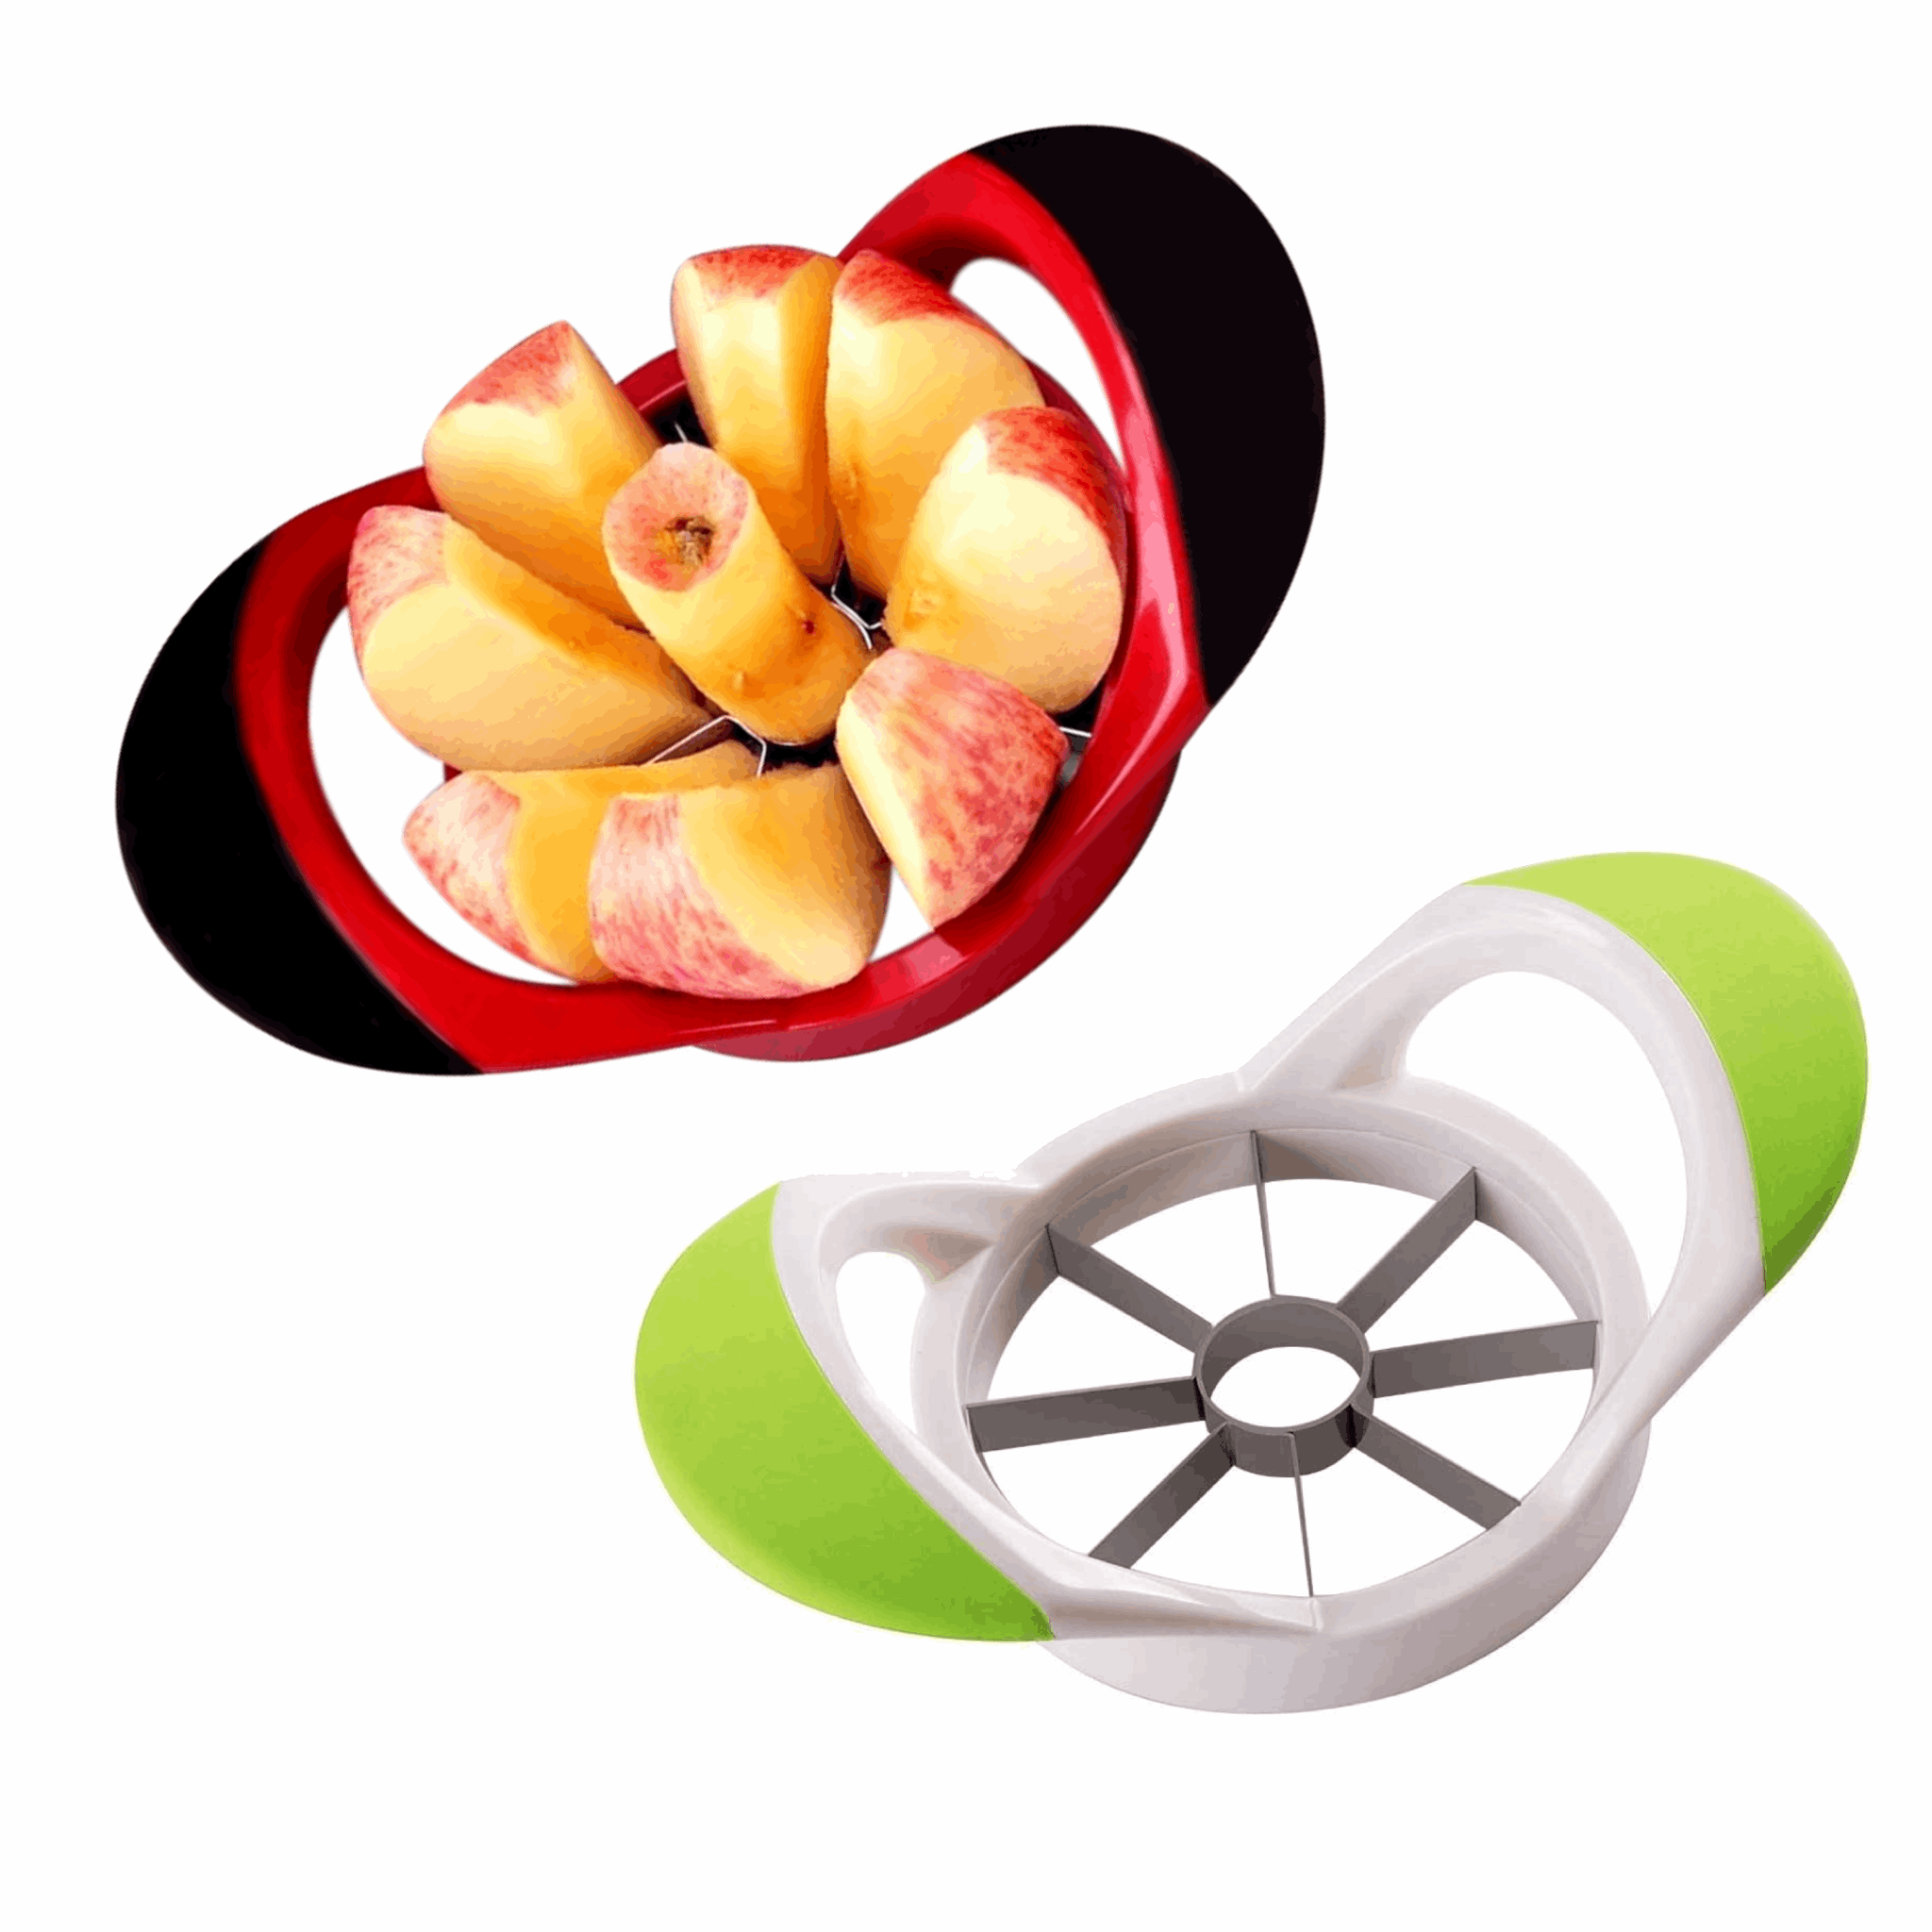 Apple Corer and Slicer - Stainless Steel Apple Cutter - Rubber Grip Handle Divider with 8 Sharp Blades